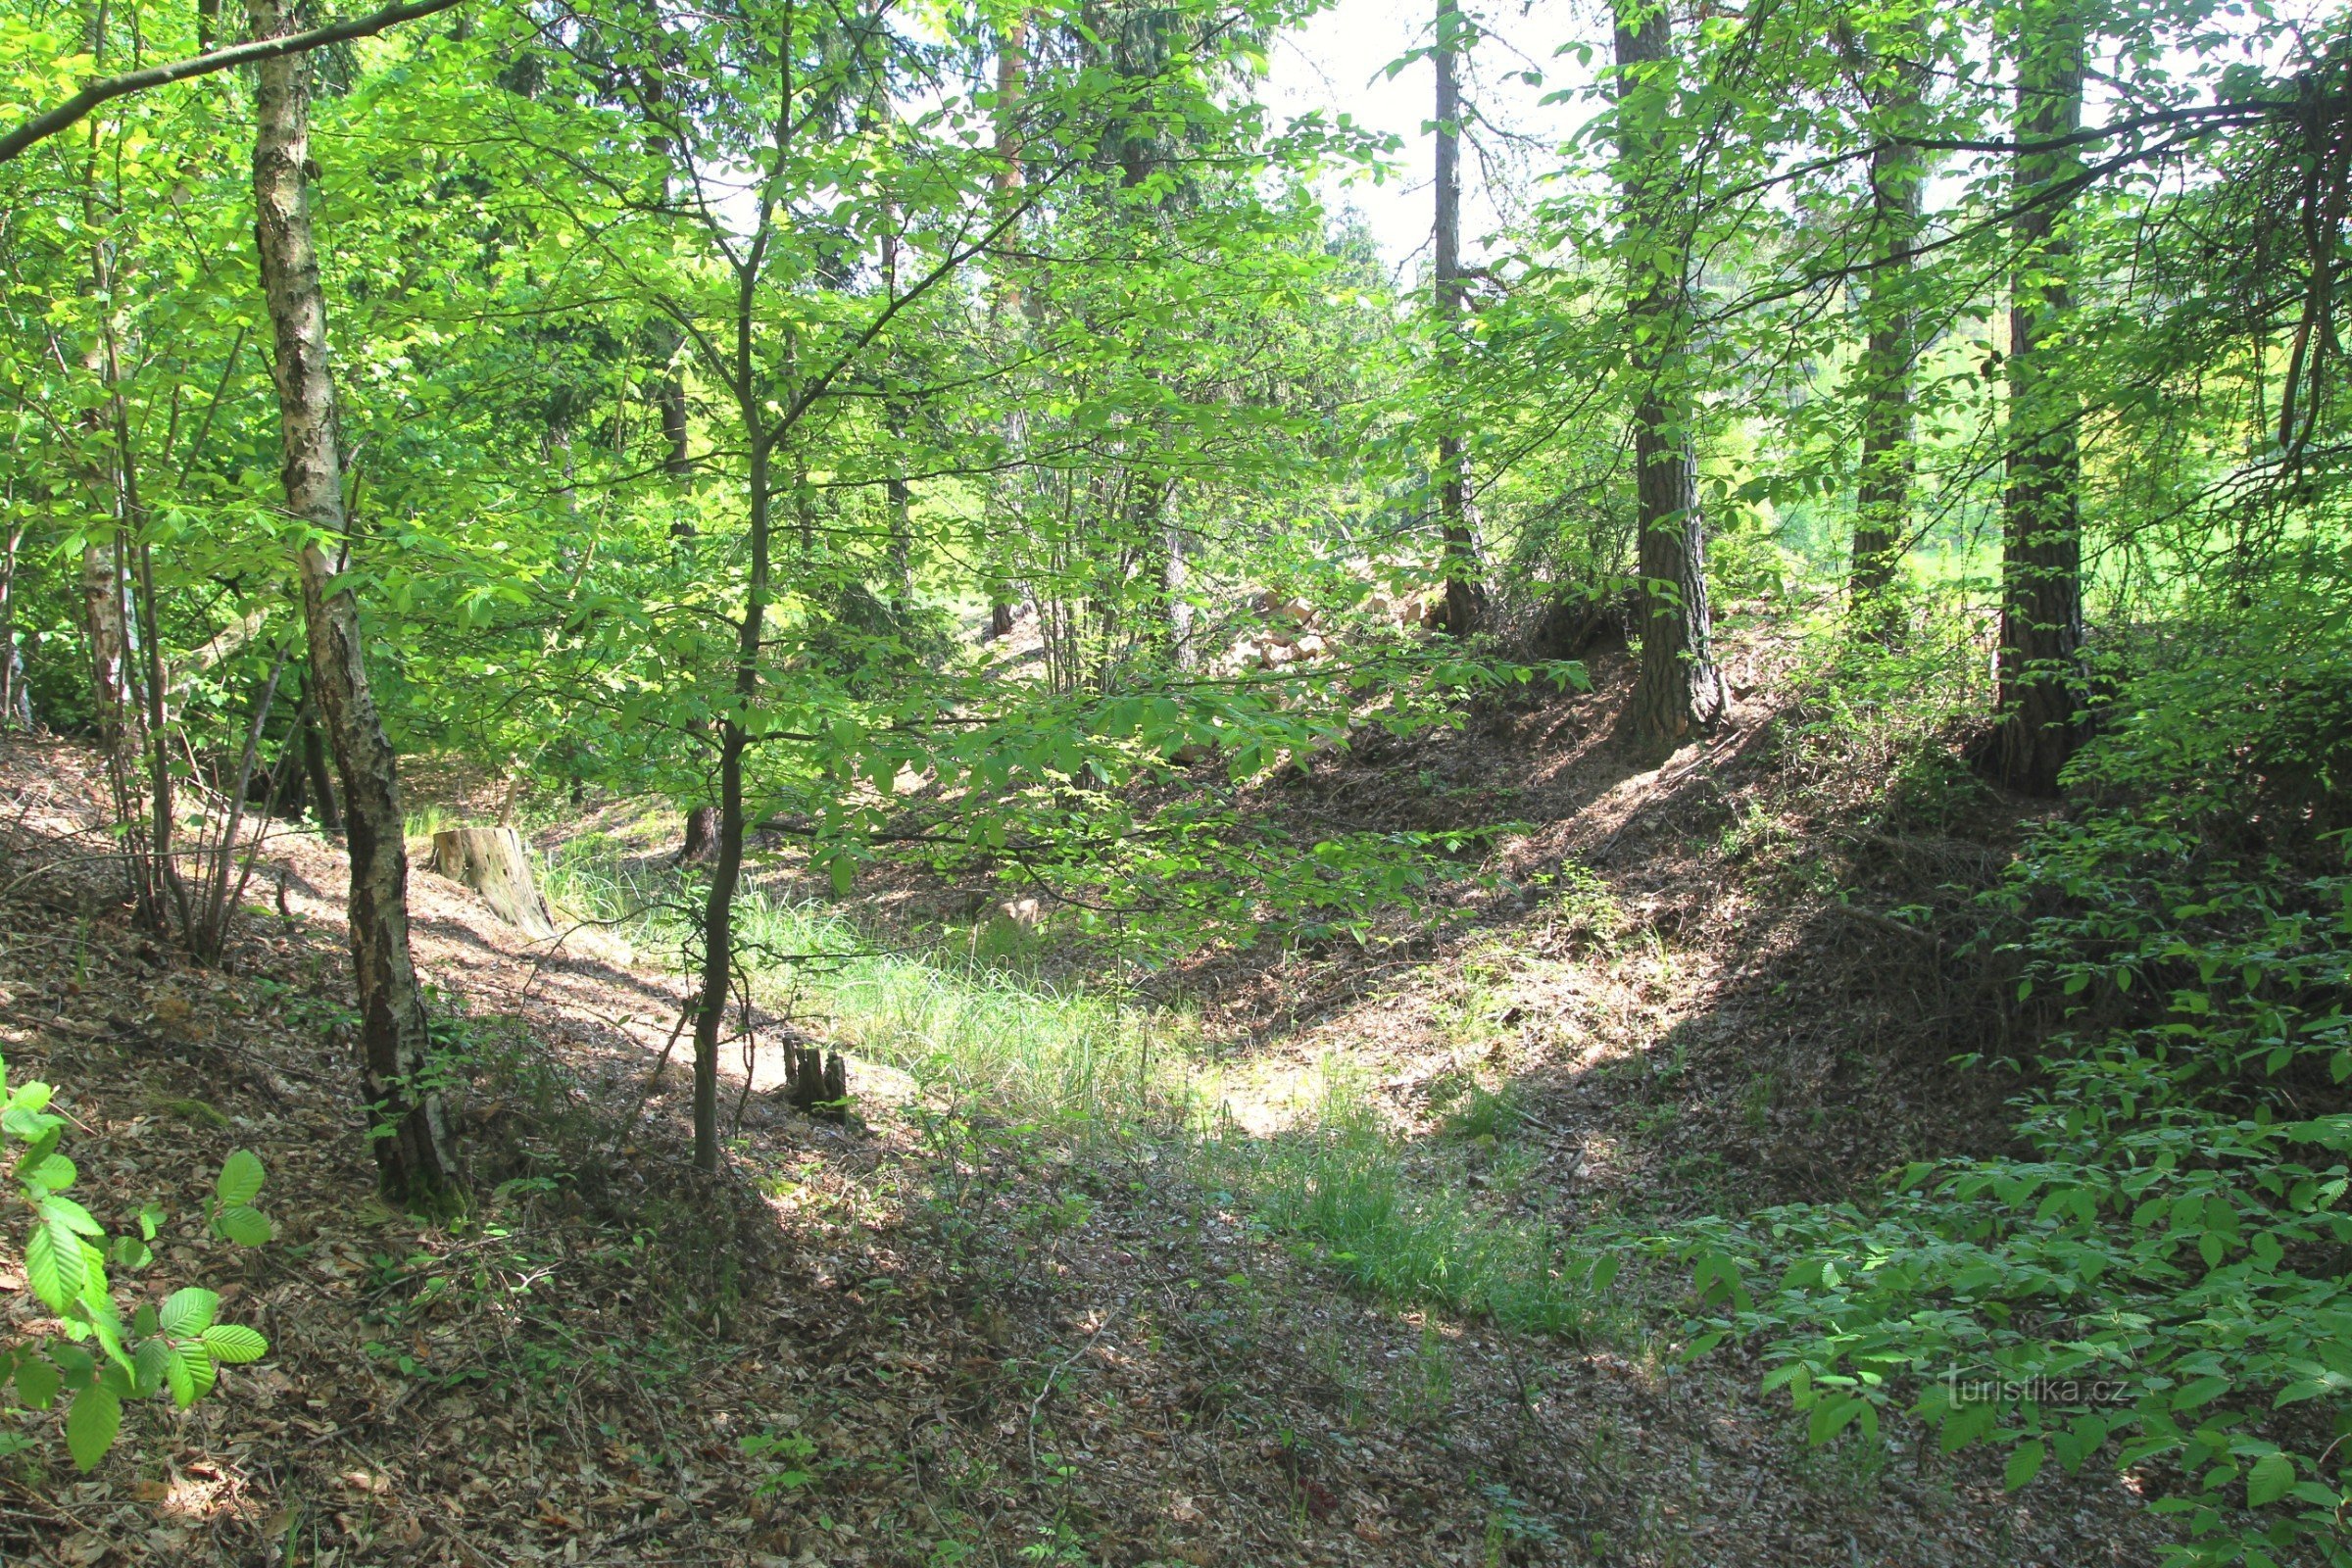 A moat preserved to this day at the edge of the forest